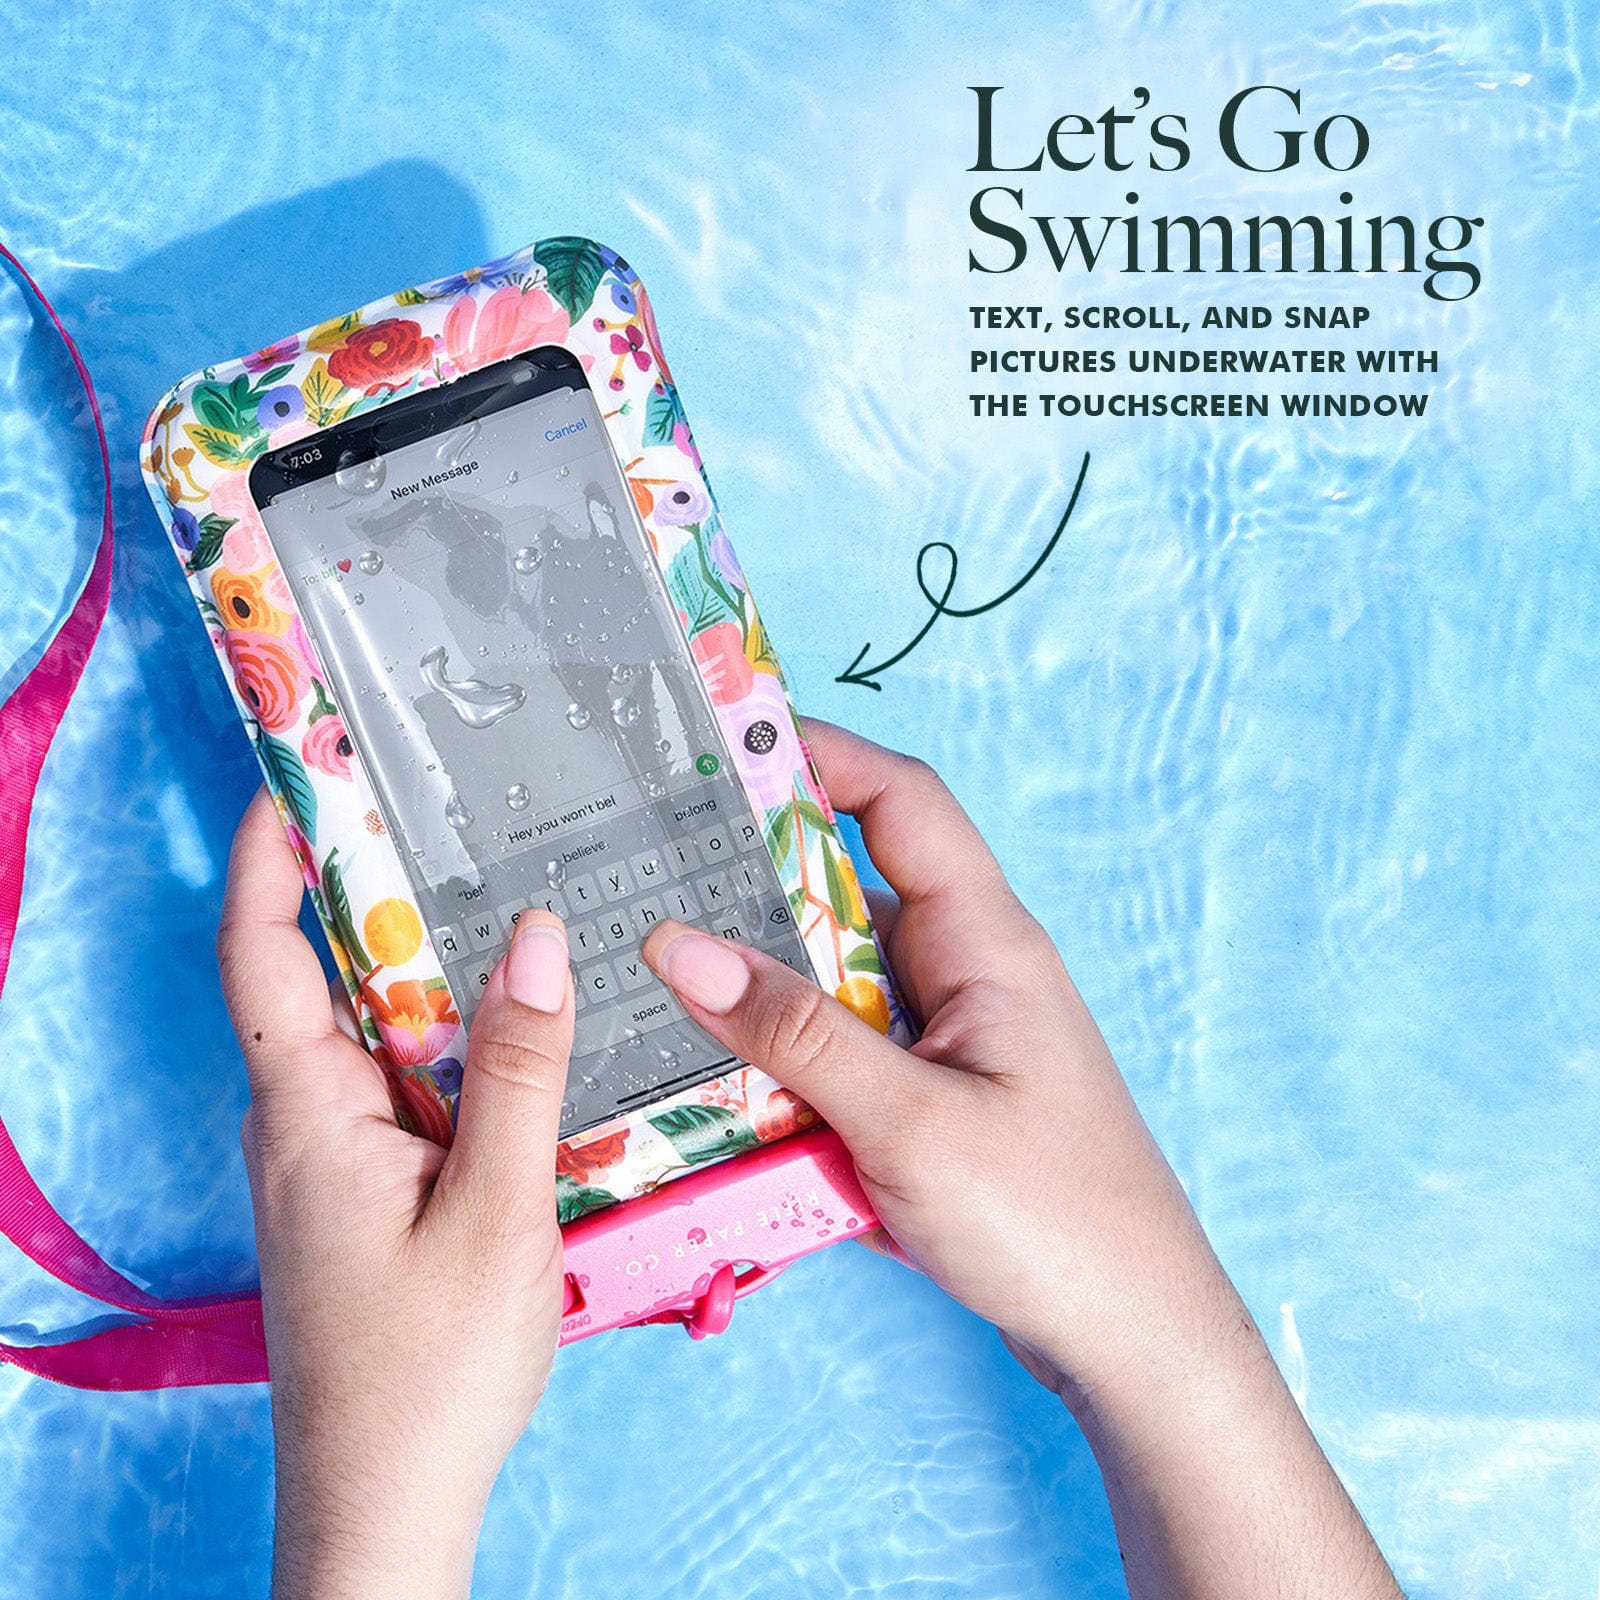 LET'S GO SWIMMING. TEXT, SCROLL, AND SNAP PICTURES UNDER WATER WITH THE TOUCHSCREEN WINDOW, 